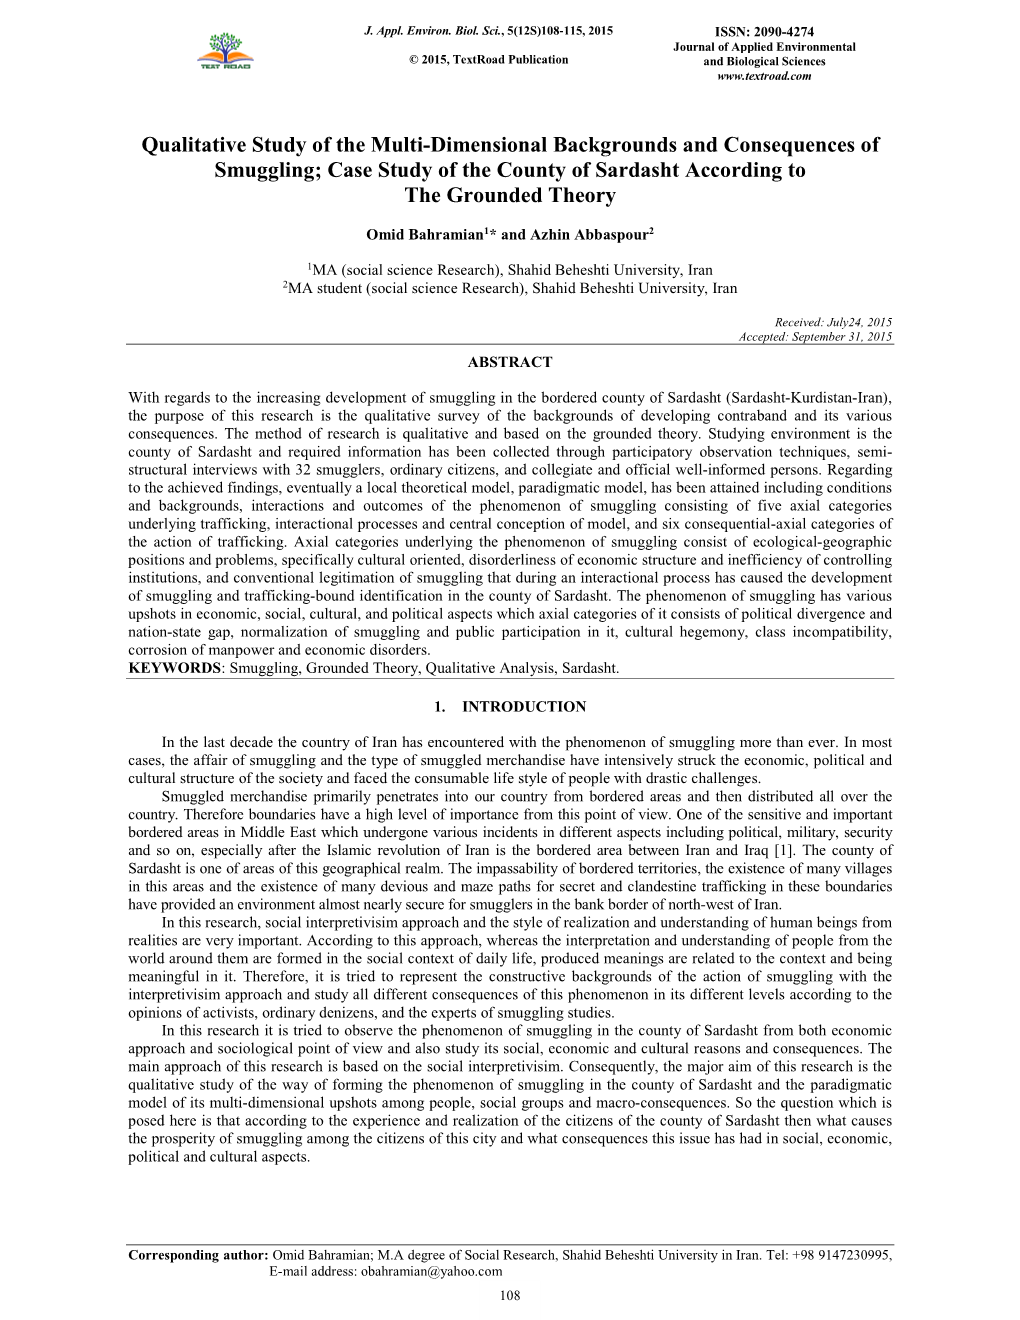 Qualitative Study of the Multi-Dimensional Backgrounds and Consequences of Smuggling; Case Study of the County of Sardasht According to the Grounded Theory